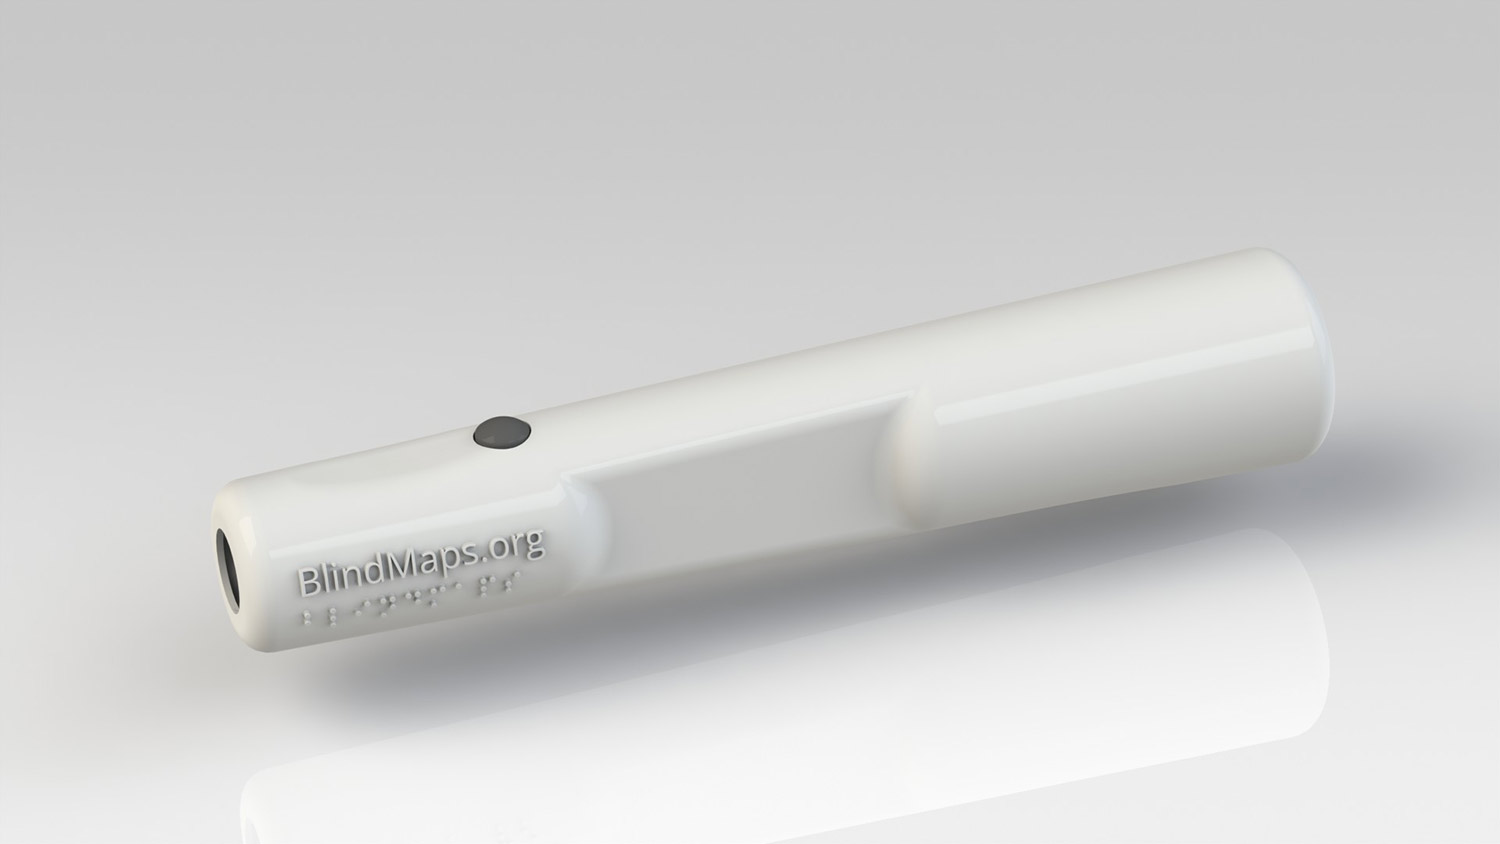 3D Rendering of the white cane's grip interface showing 1 buttons on the grip and an area for the fingers where vibrations will happen for tactile output